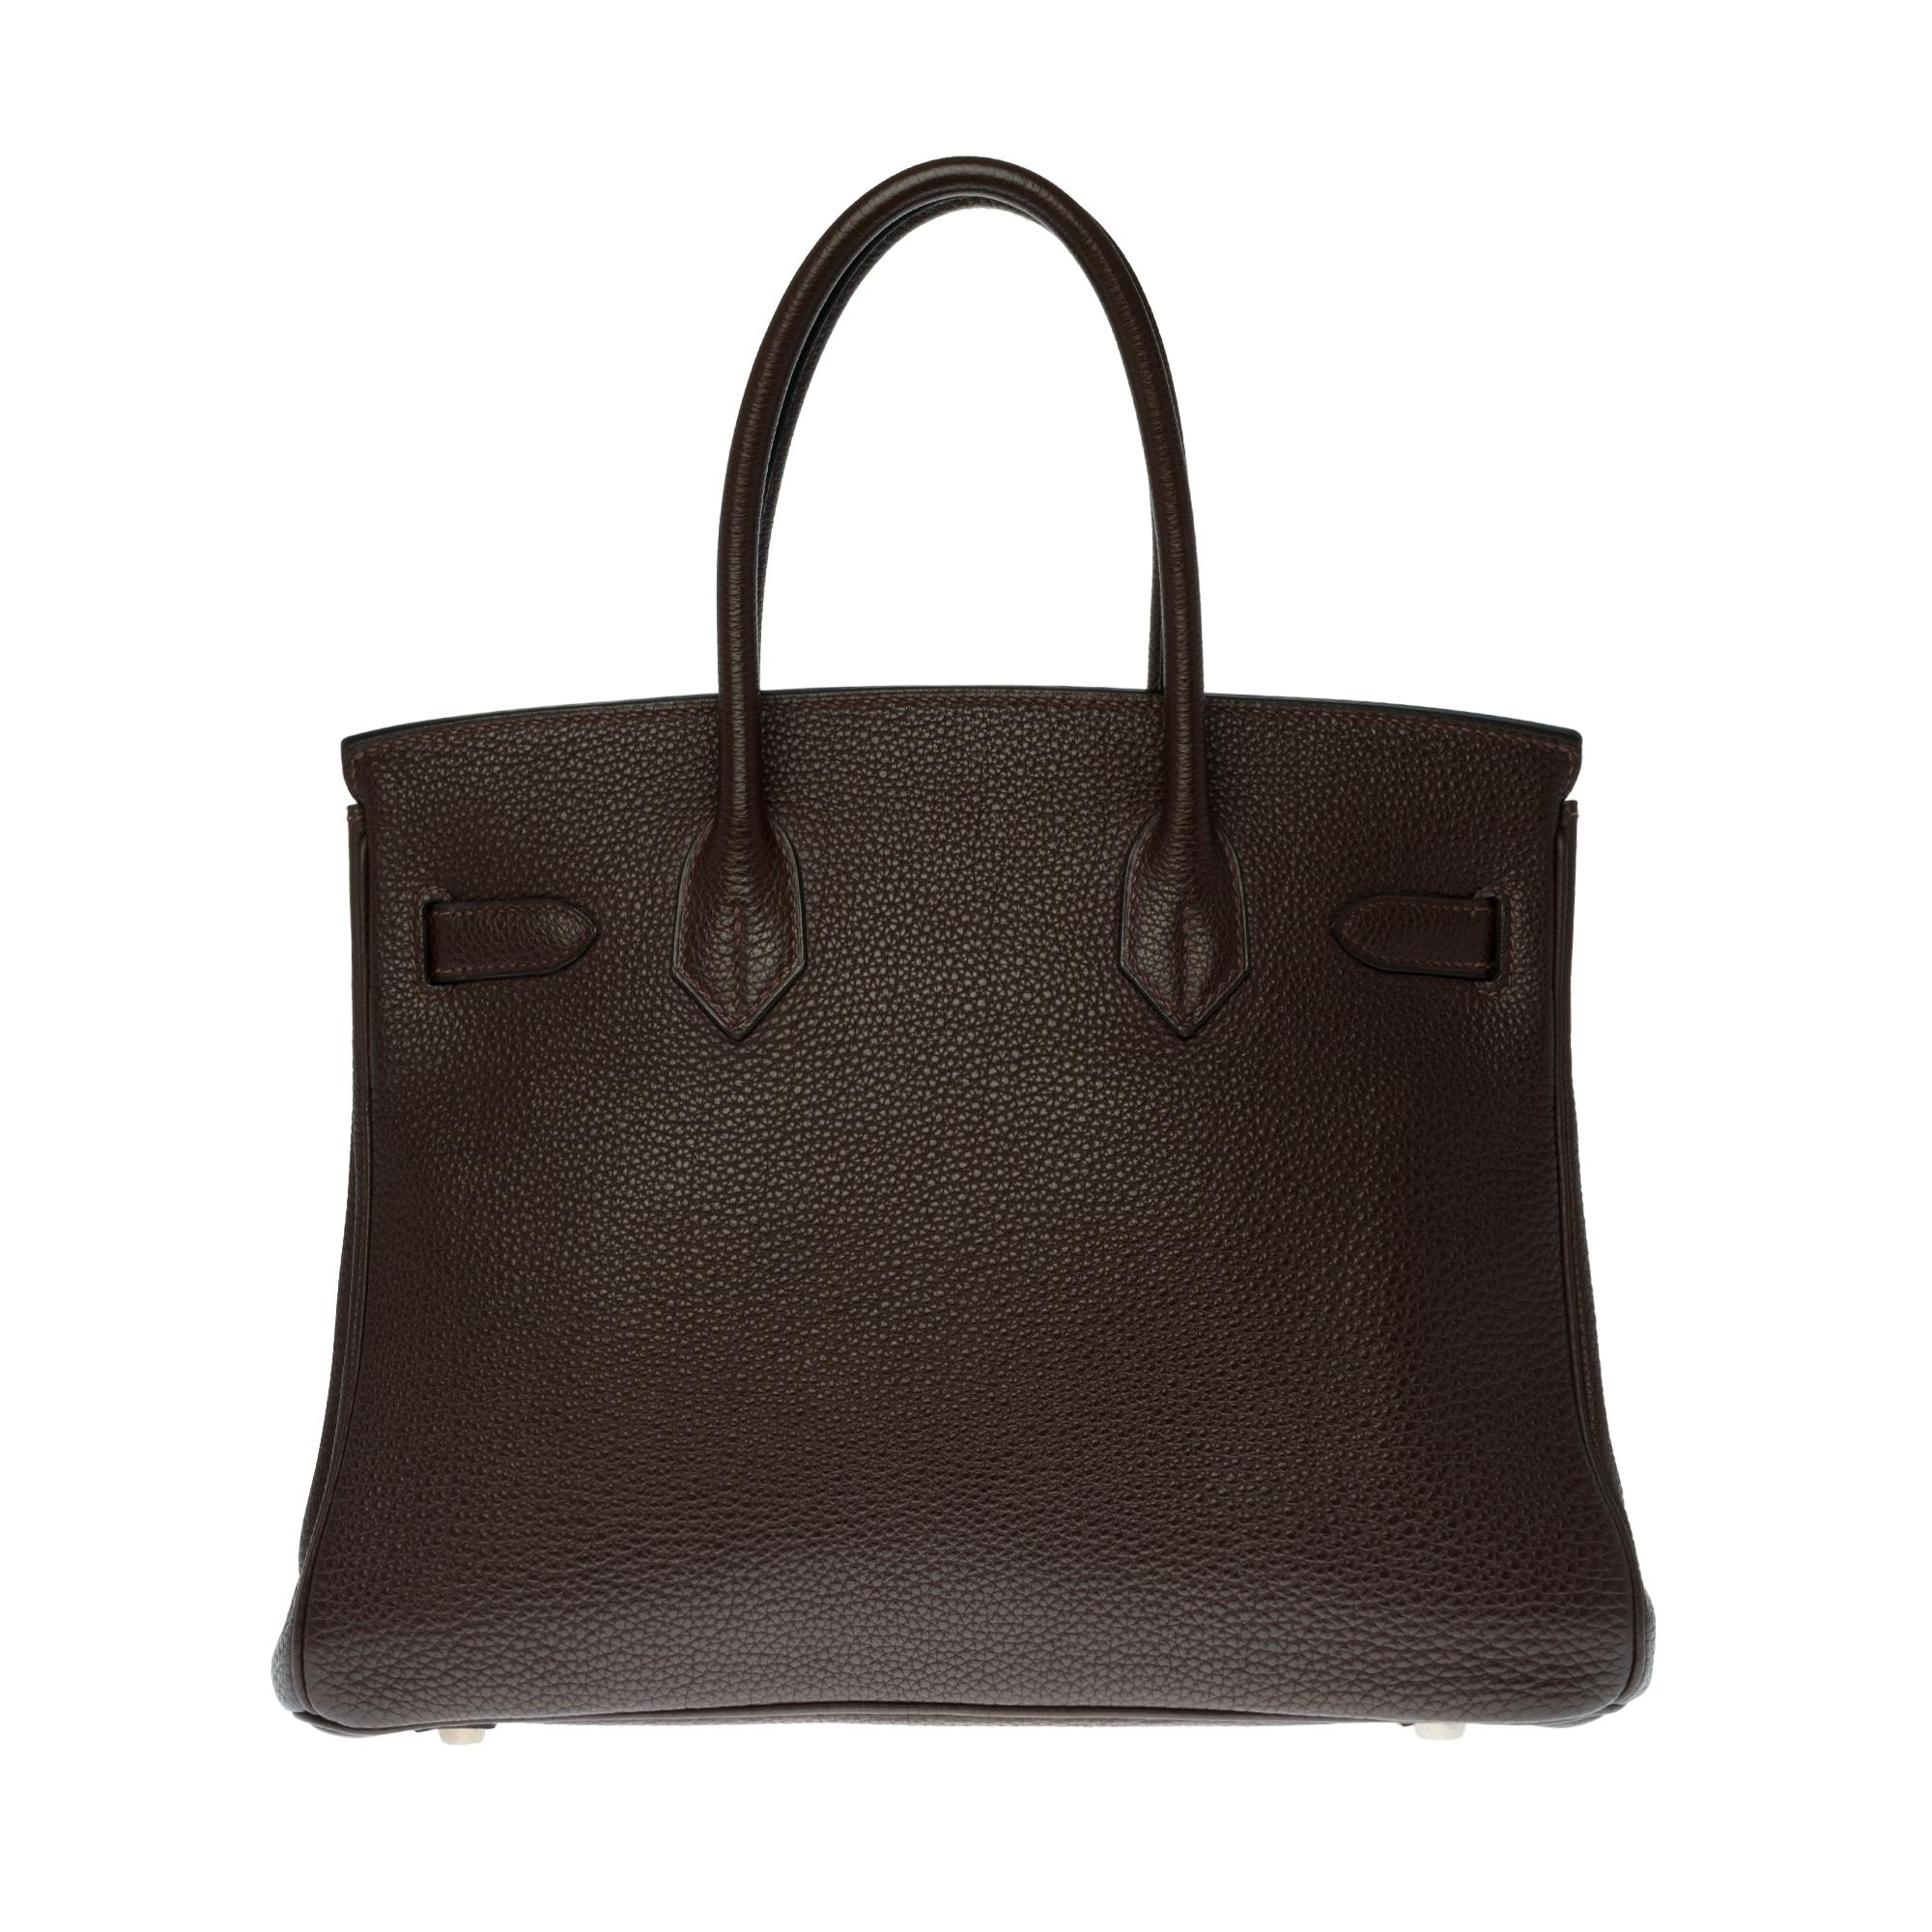 Superb and Rare Hermes Birkin 30 cm handbag in Brown Togo Leather , silver metal Palladium hardware, double handle in brown leather allowing a handstand.

Closure by flap.
Lining in brown leather, a zipped pocket, a patch pocket.
Signature: 